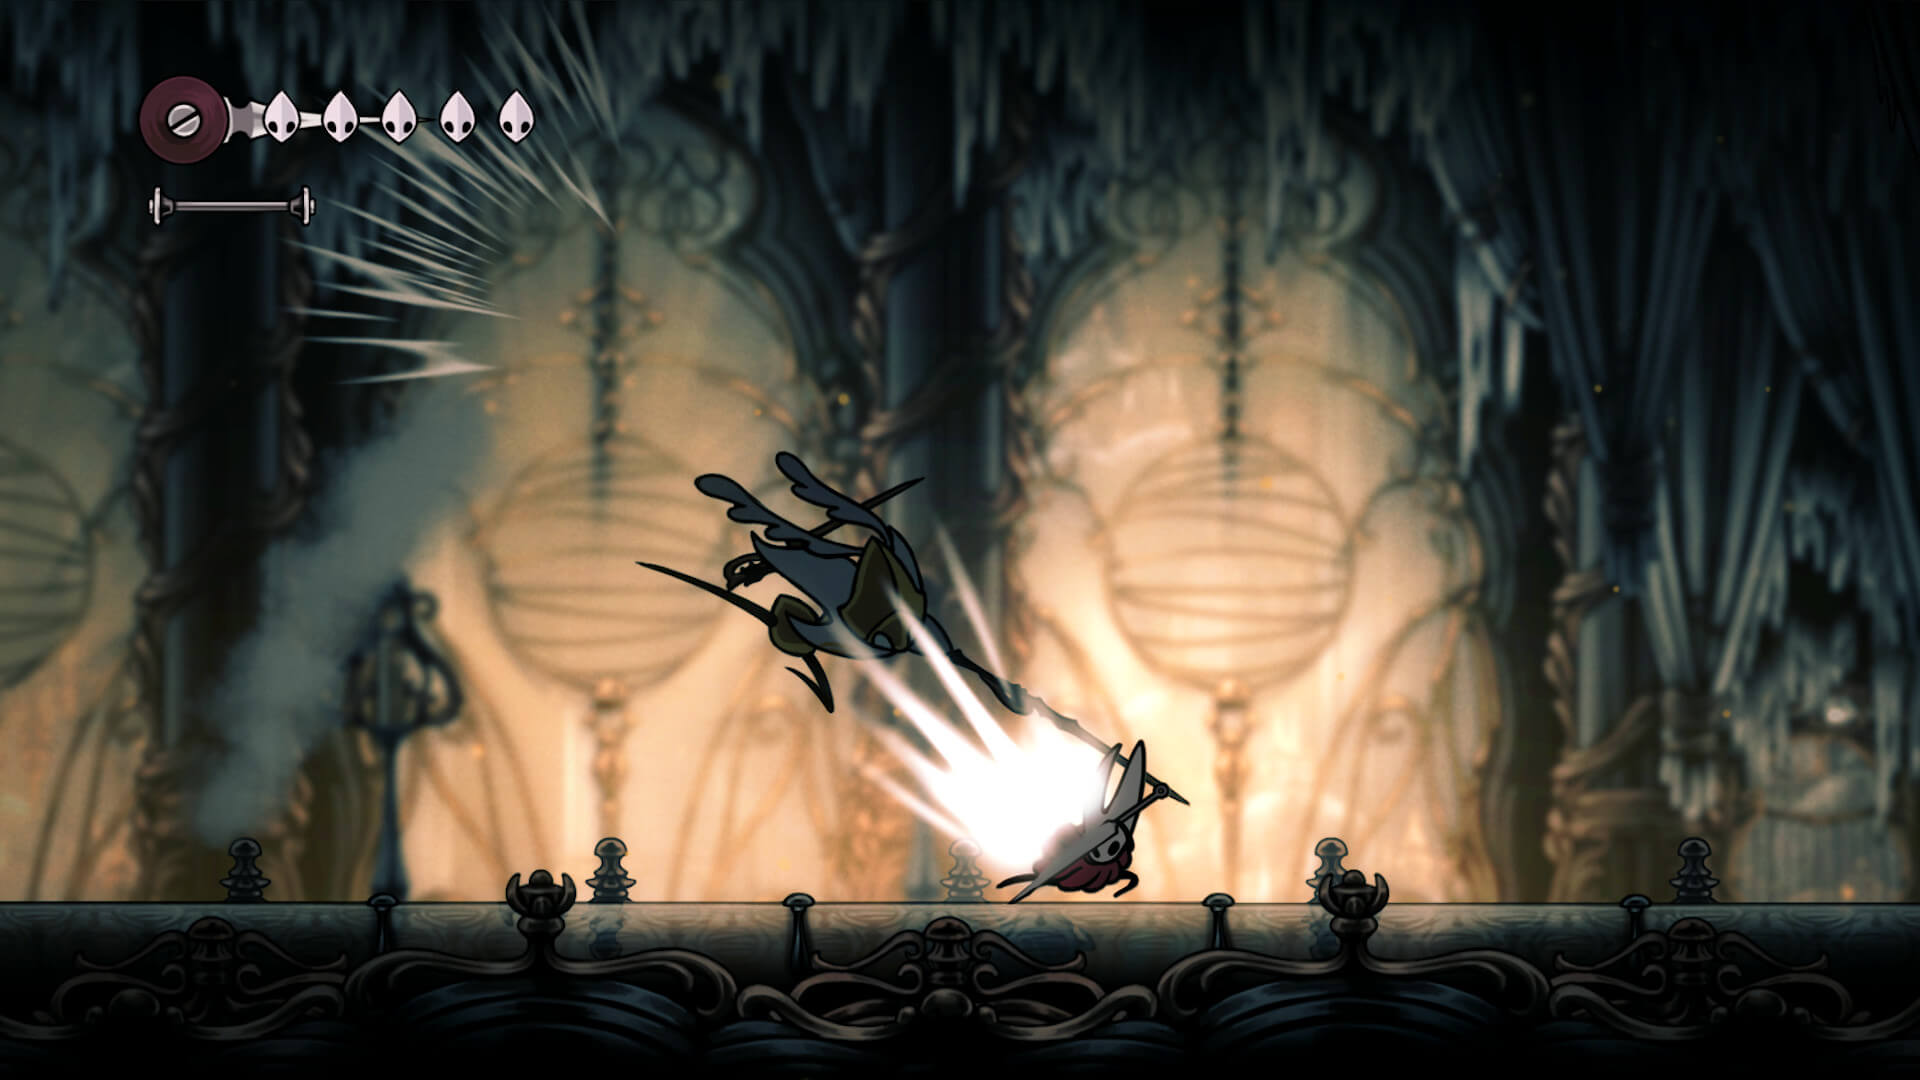 Hornet parrying an enemy's strike in Hollow Knight: Silksong